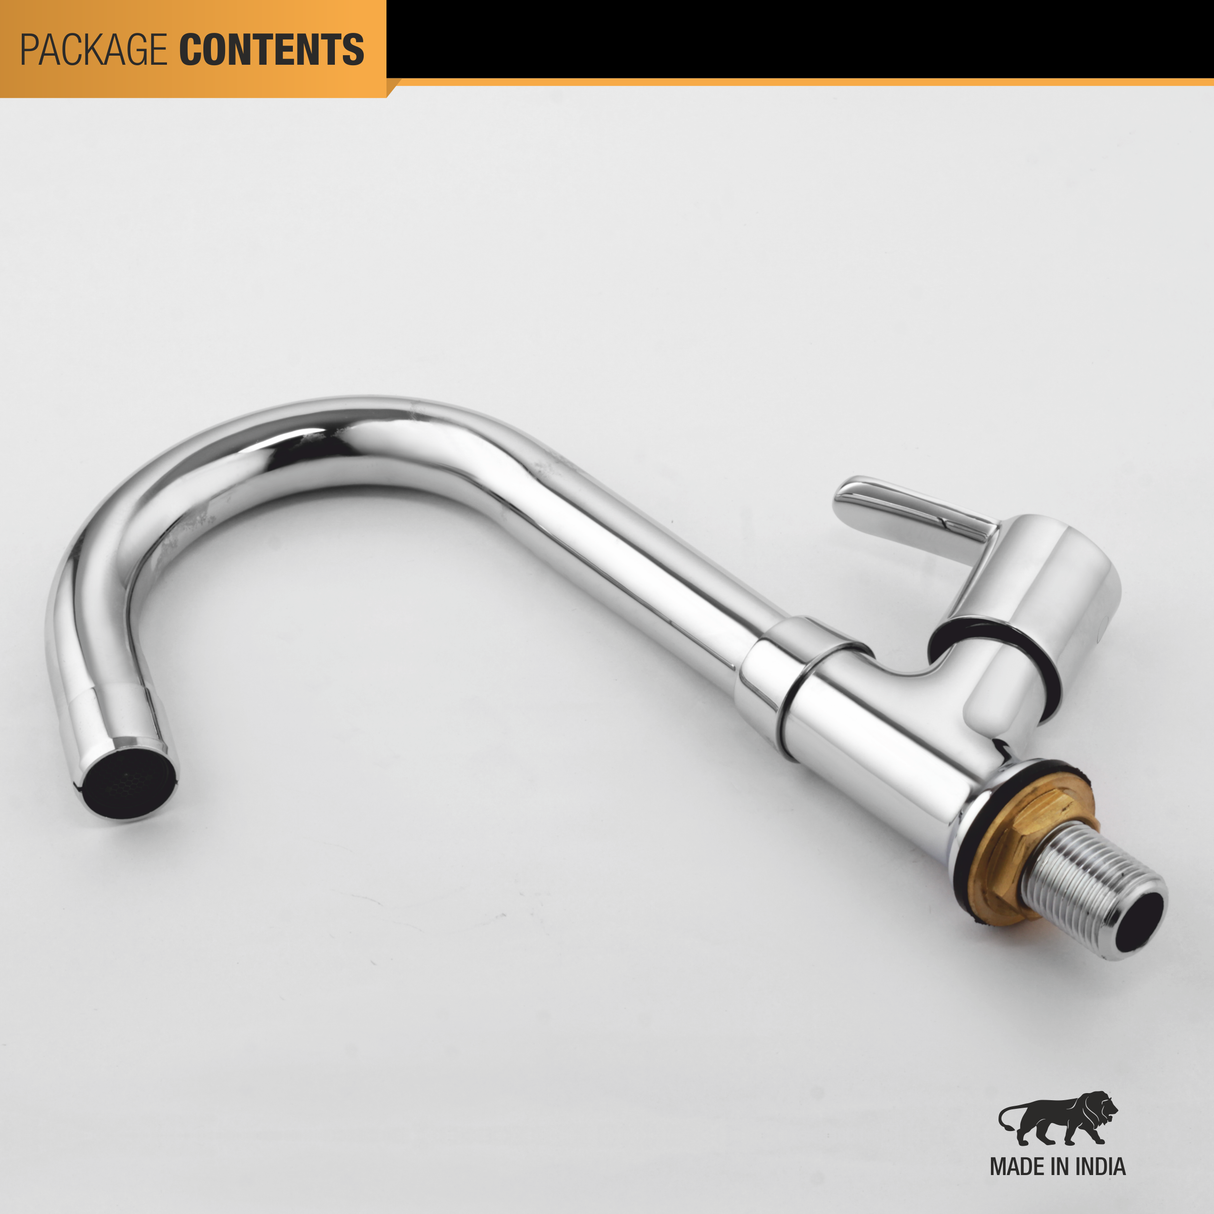 Rica Swan Neck with Swivel Spout Faucet 5